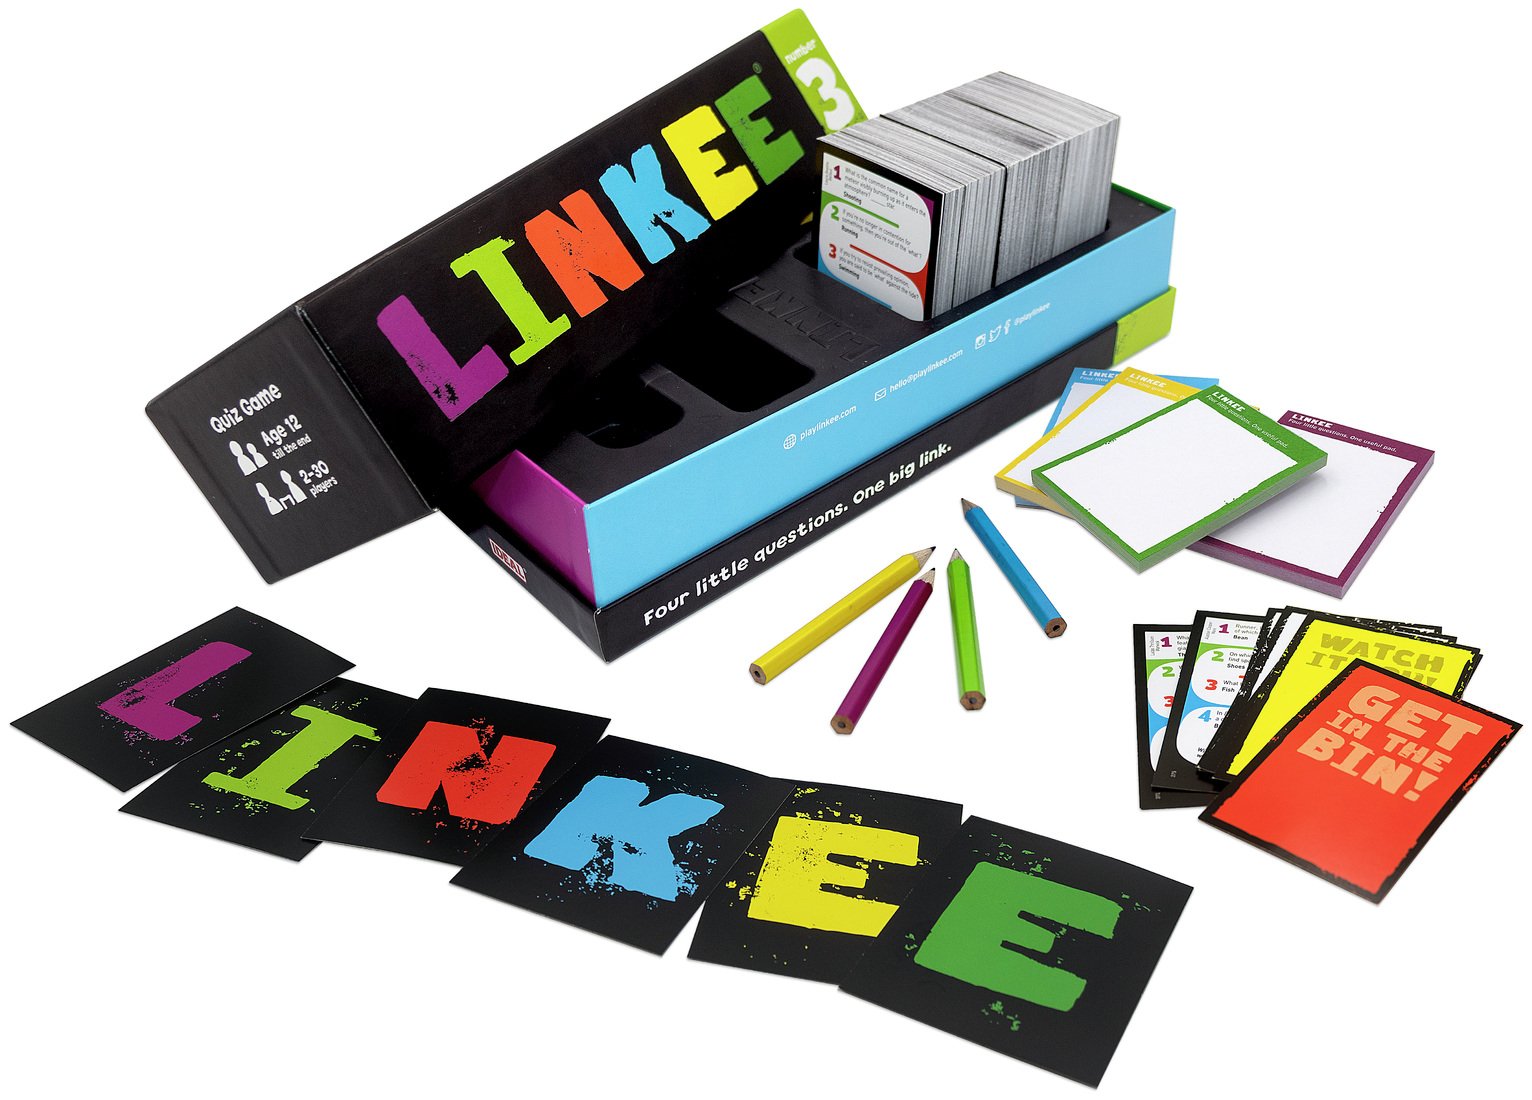 Linkee Review